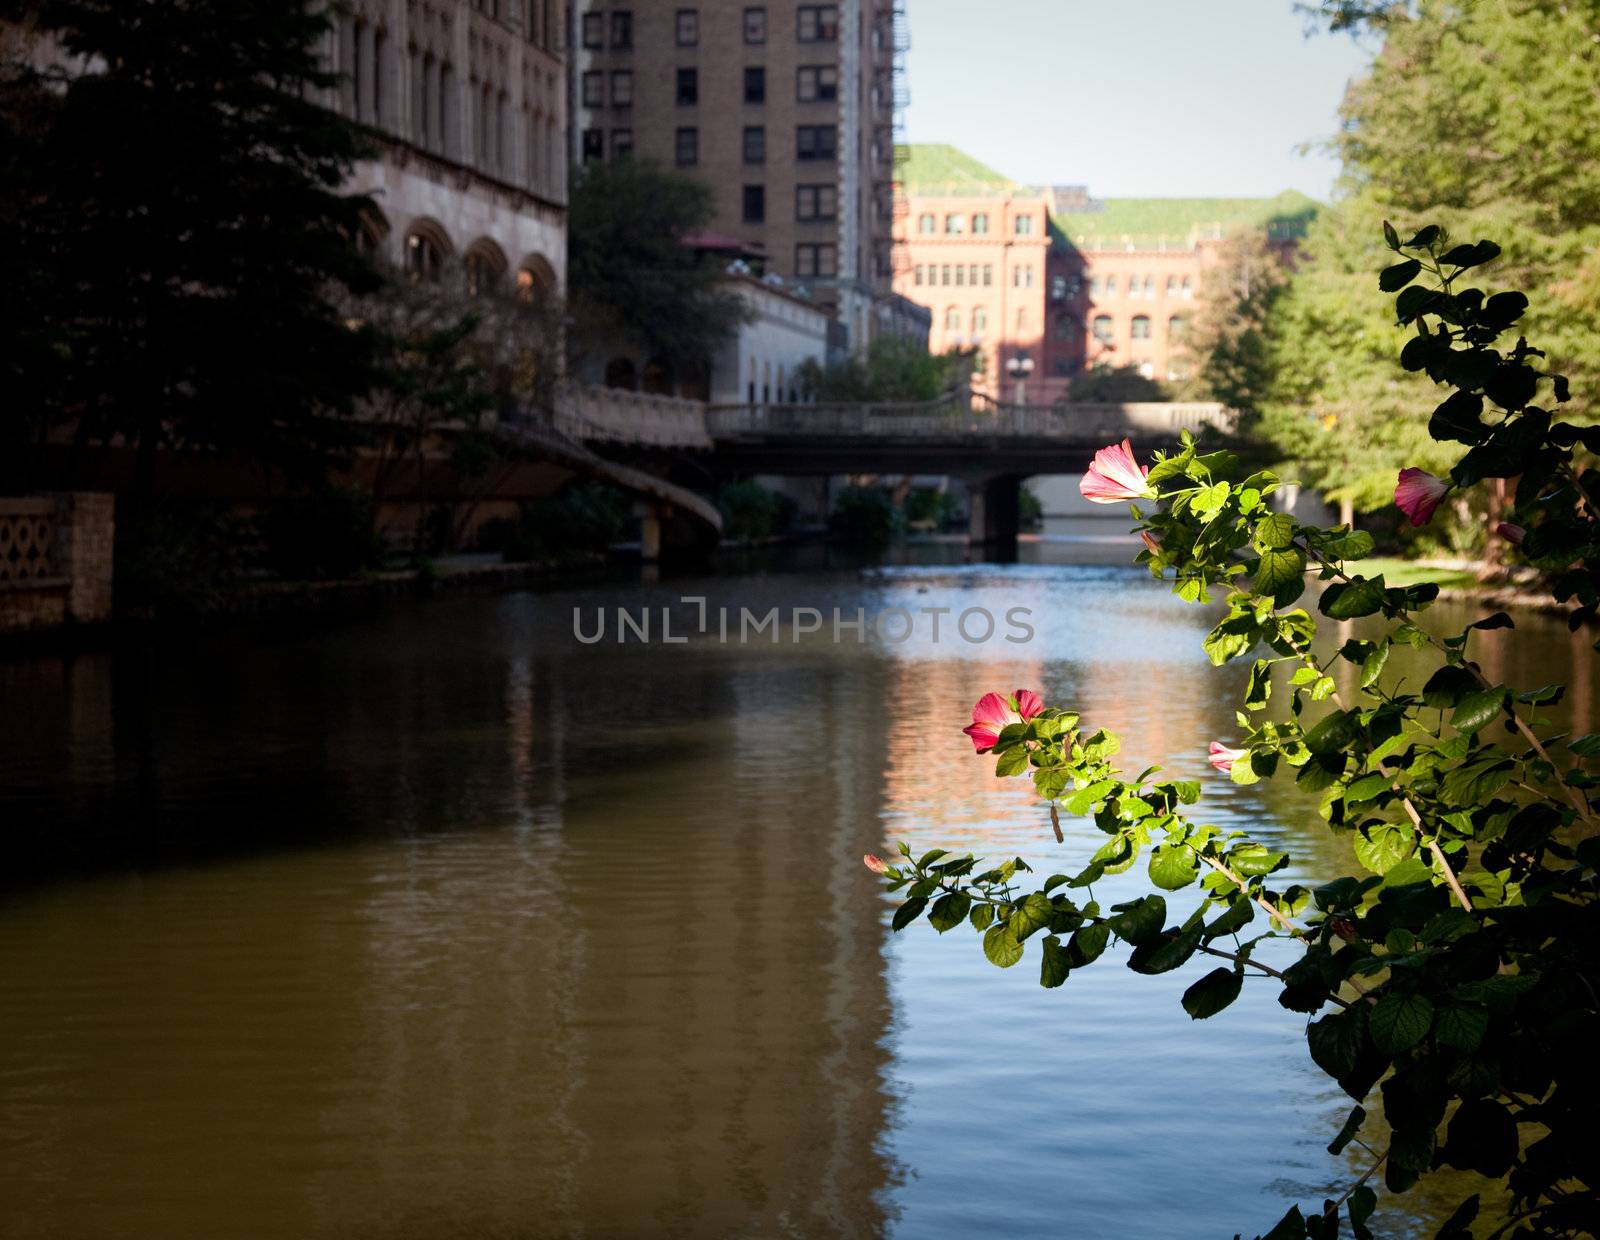 River in San Antonio with old buildings by steheap